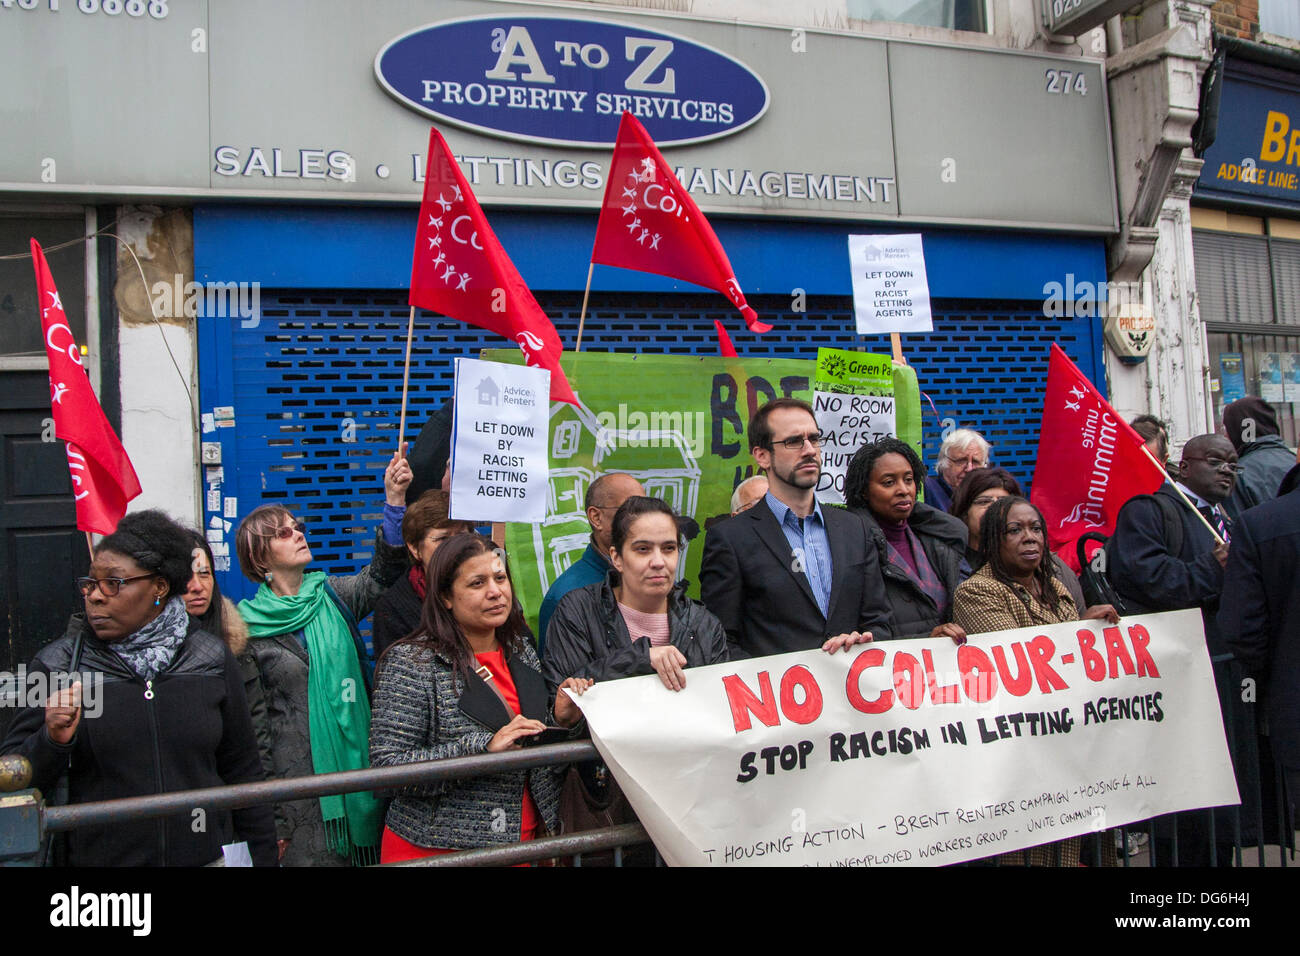 London, UK. 15th October 2013. Anti-racism campaigners demonstrate outside A to Z Property Services in Willesden Green, North London, after the lettings agents were found to have denied rental properties to Afro-Caribbean homeseekers. Credit:  Paul Davey/Alamy Live News Stock Photo